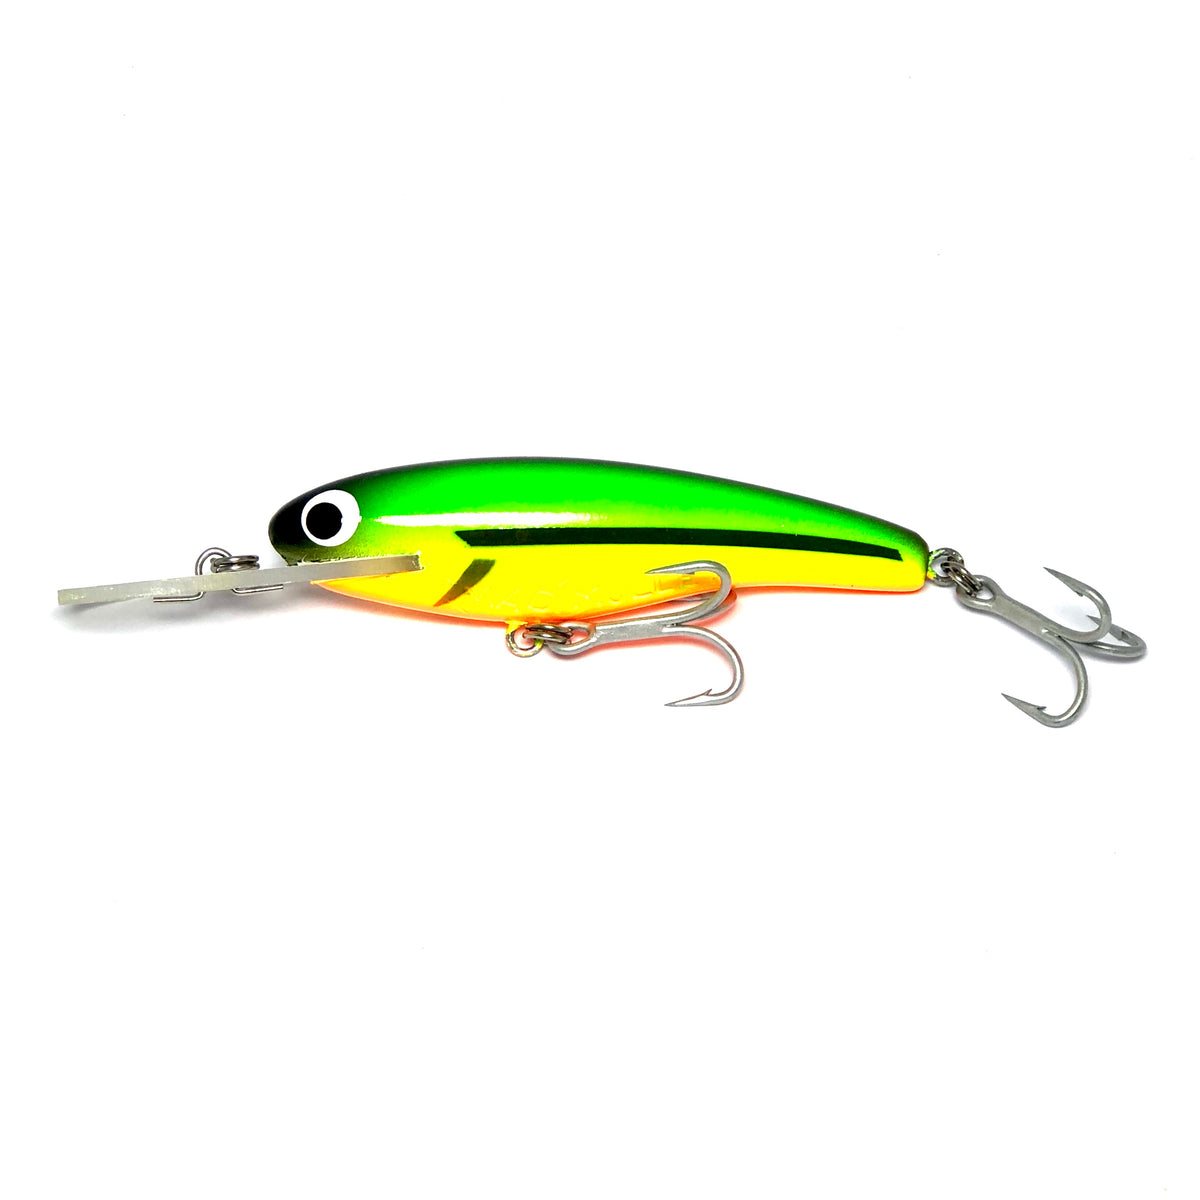 The Slick Lures Mad Mullet 82